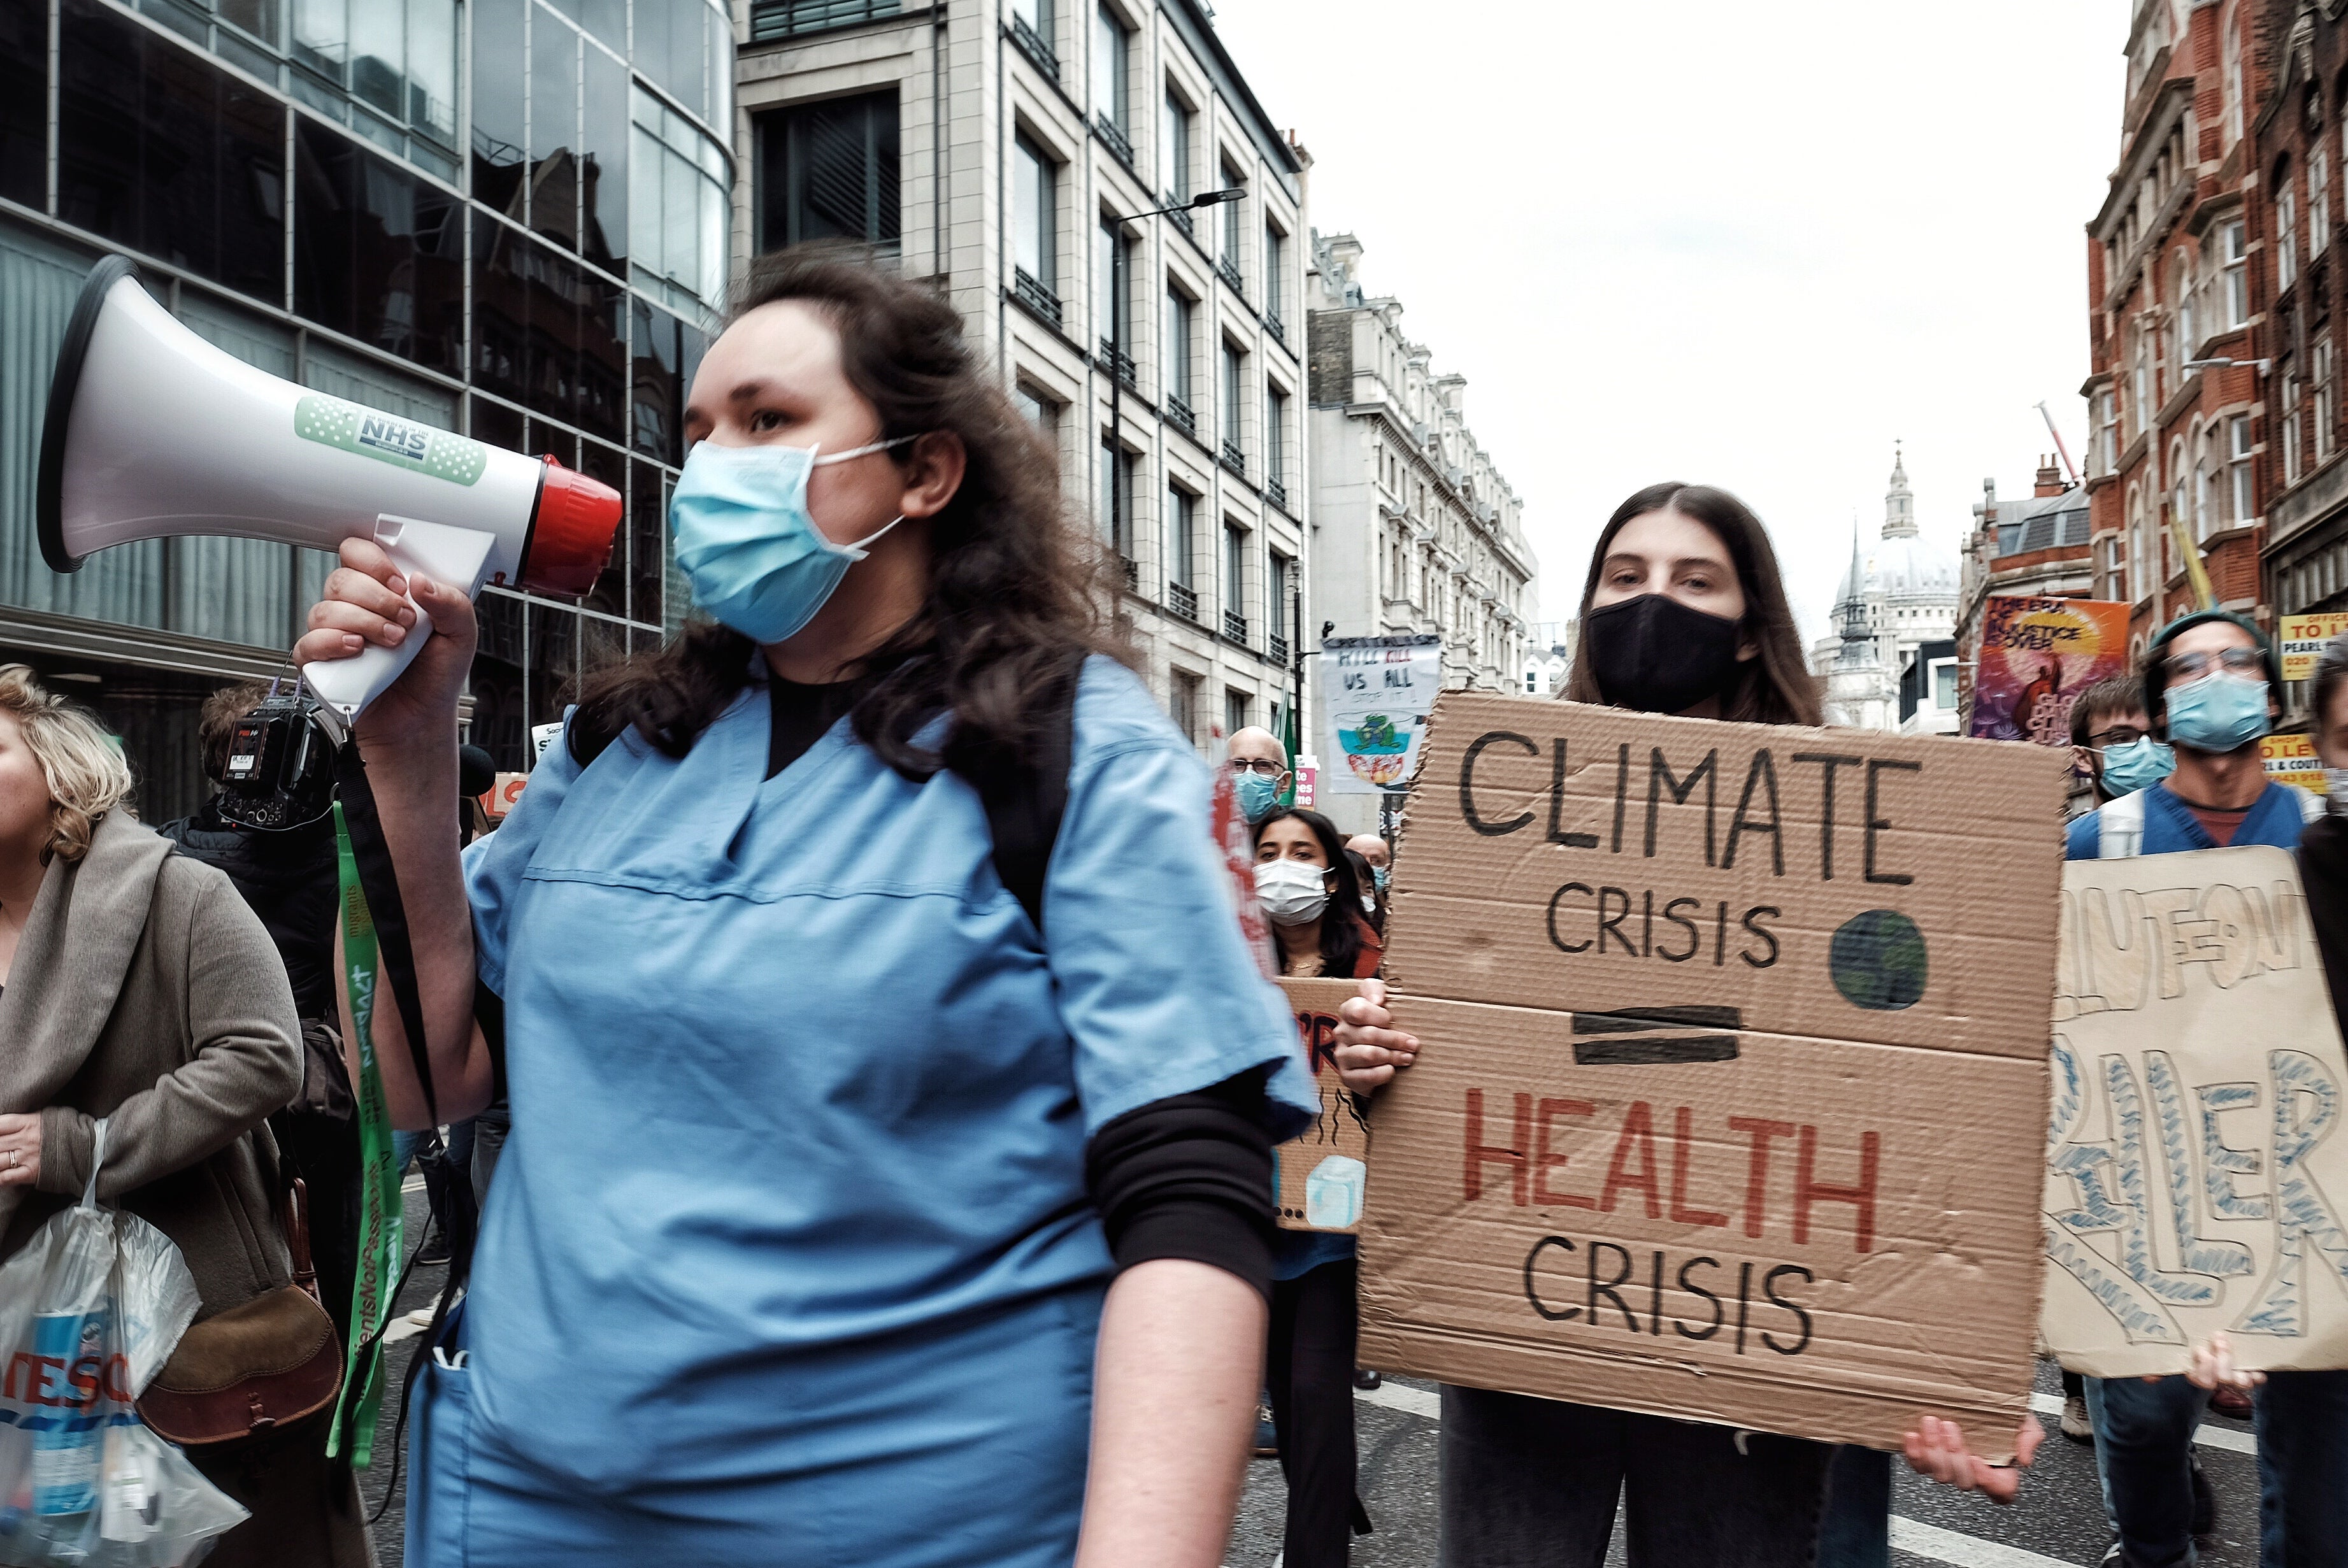 The climate crisis is not just about the environment: it’s a health and humanitarian crisis